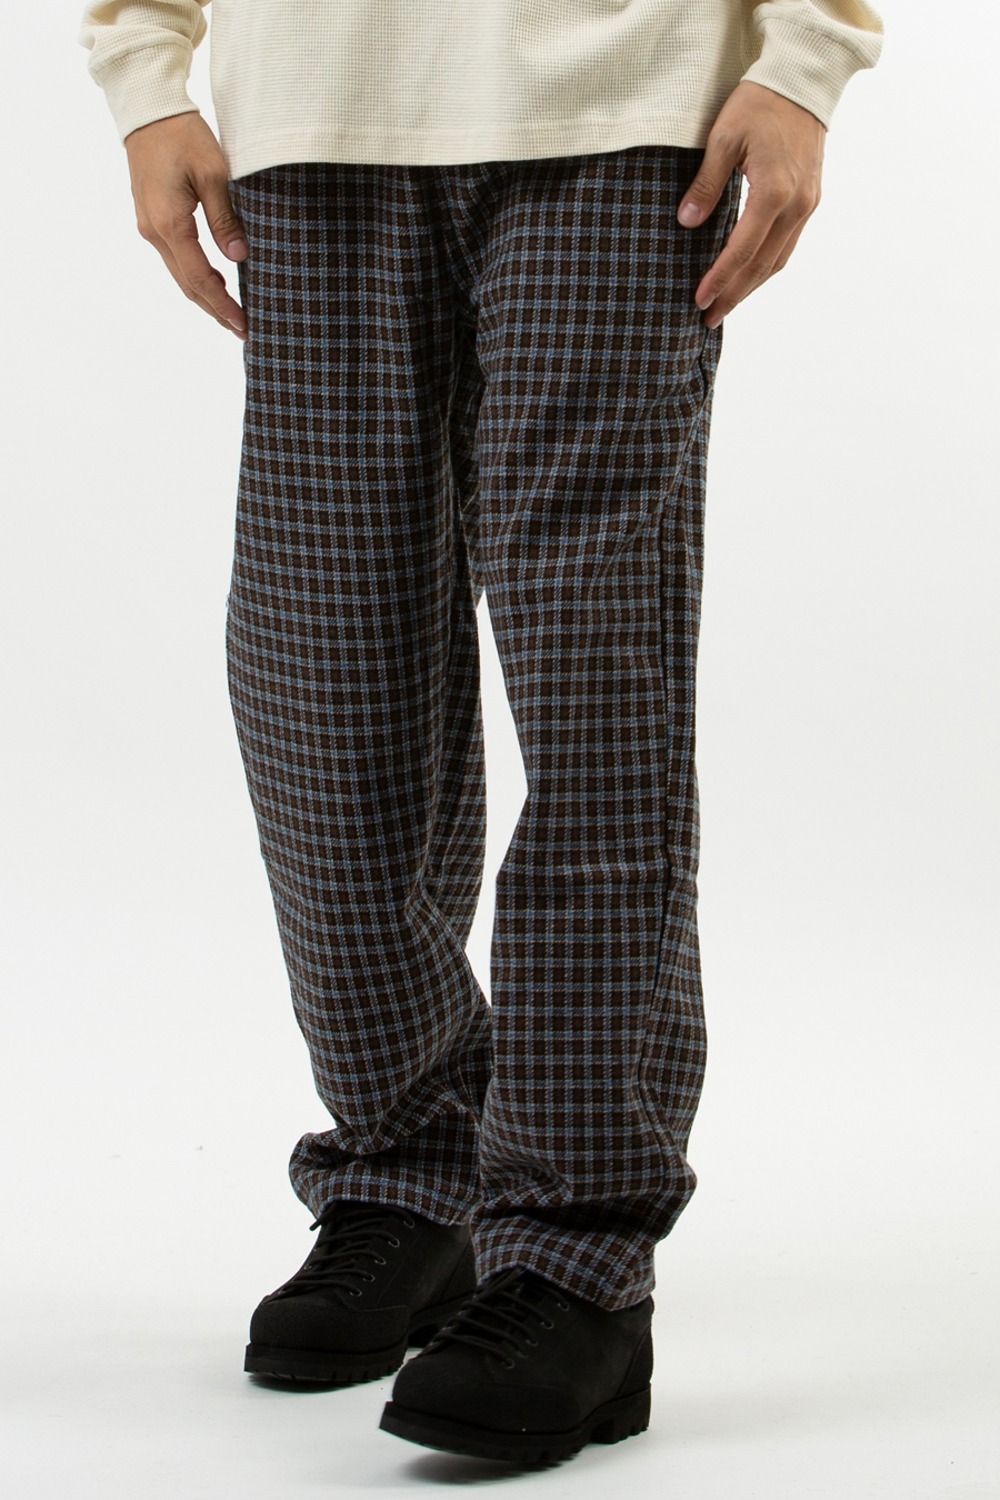 IGNITION PLAID PANT BROWN